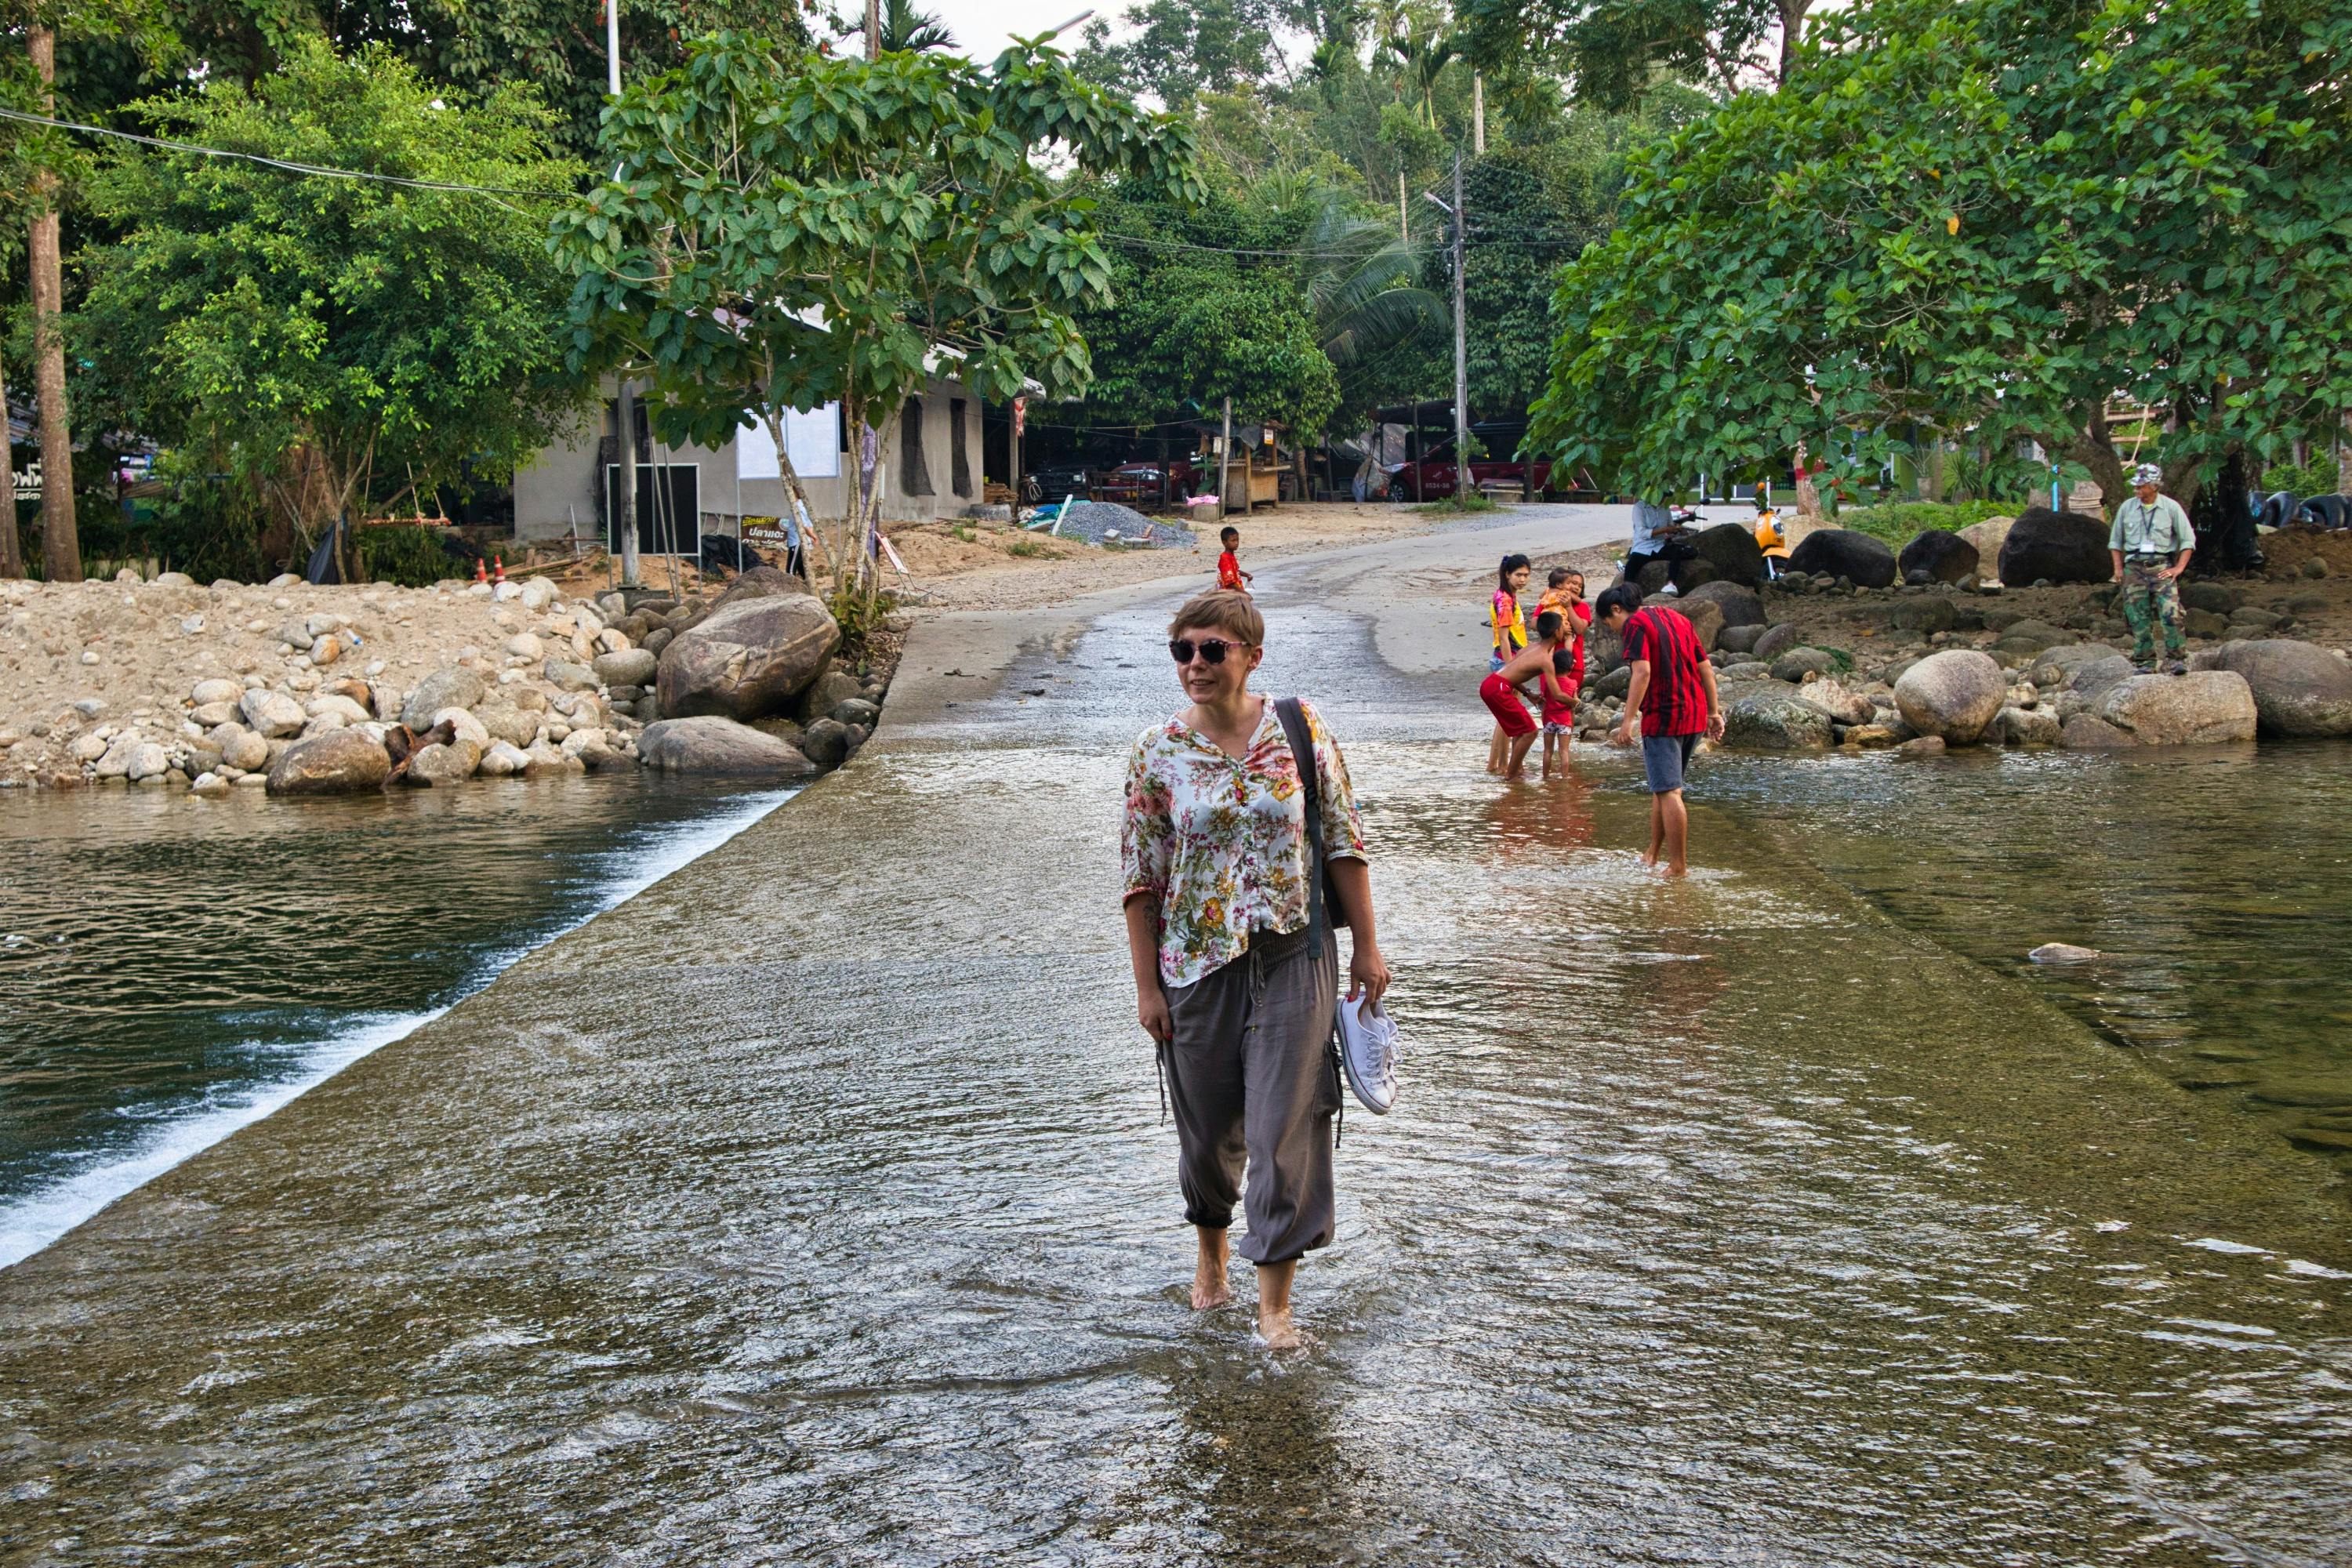 a woman dressed in a flowery shirt walks through the stream in thailand